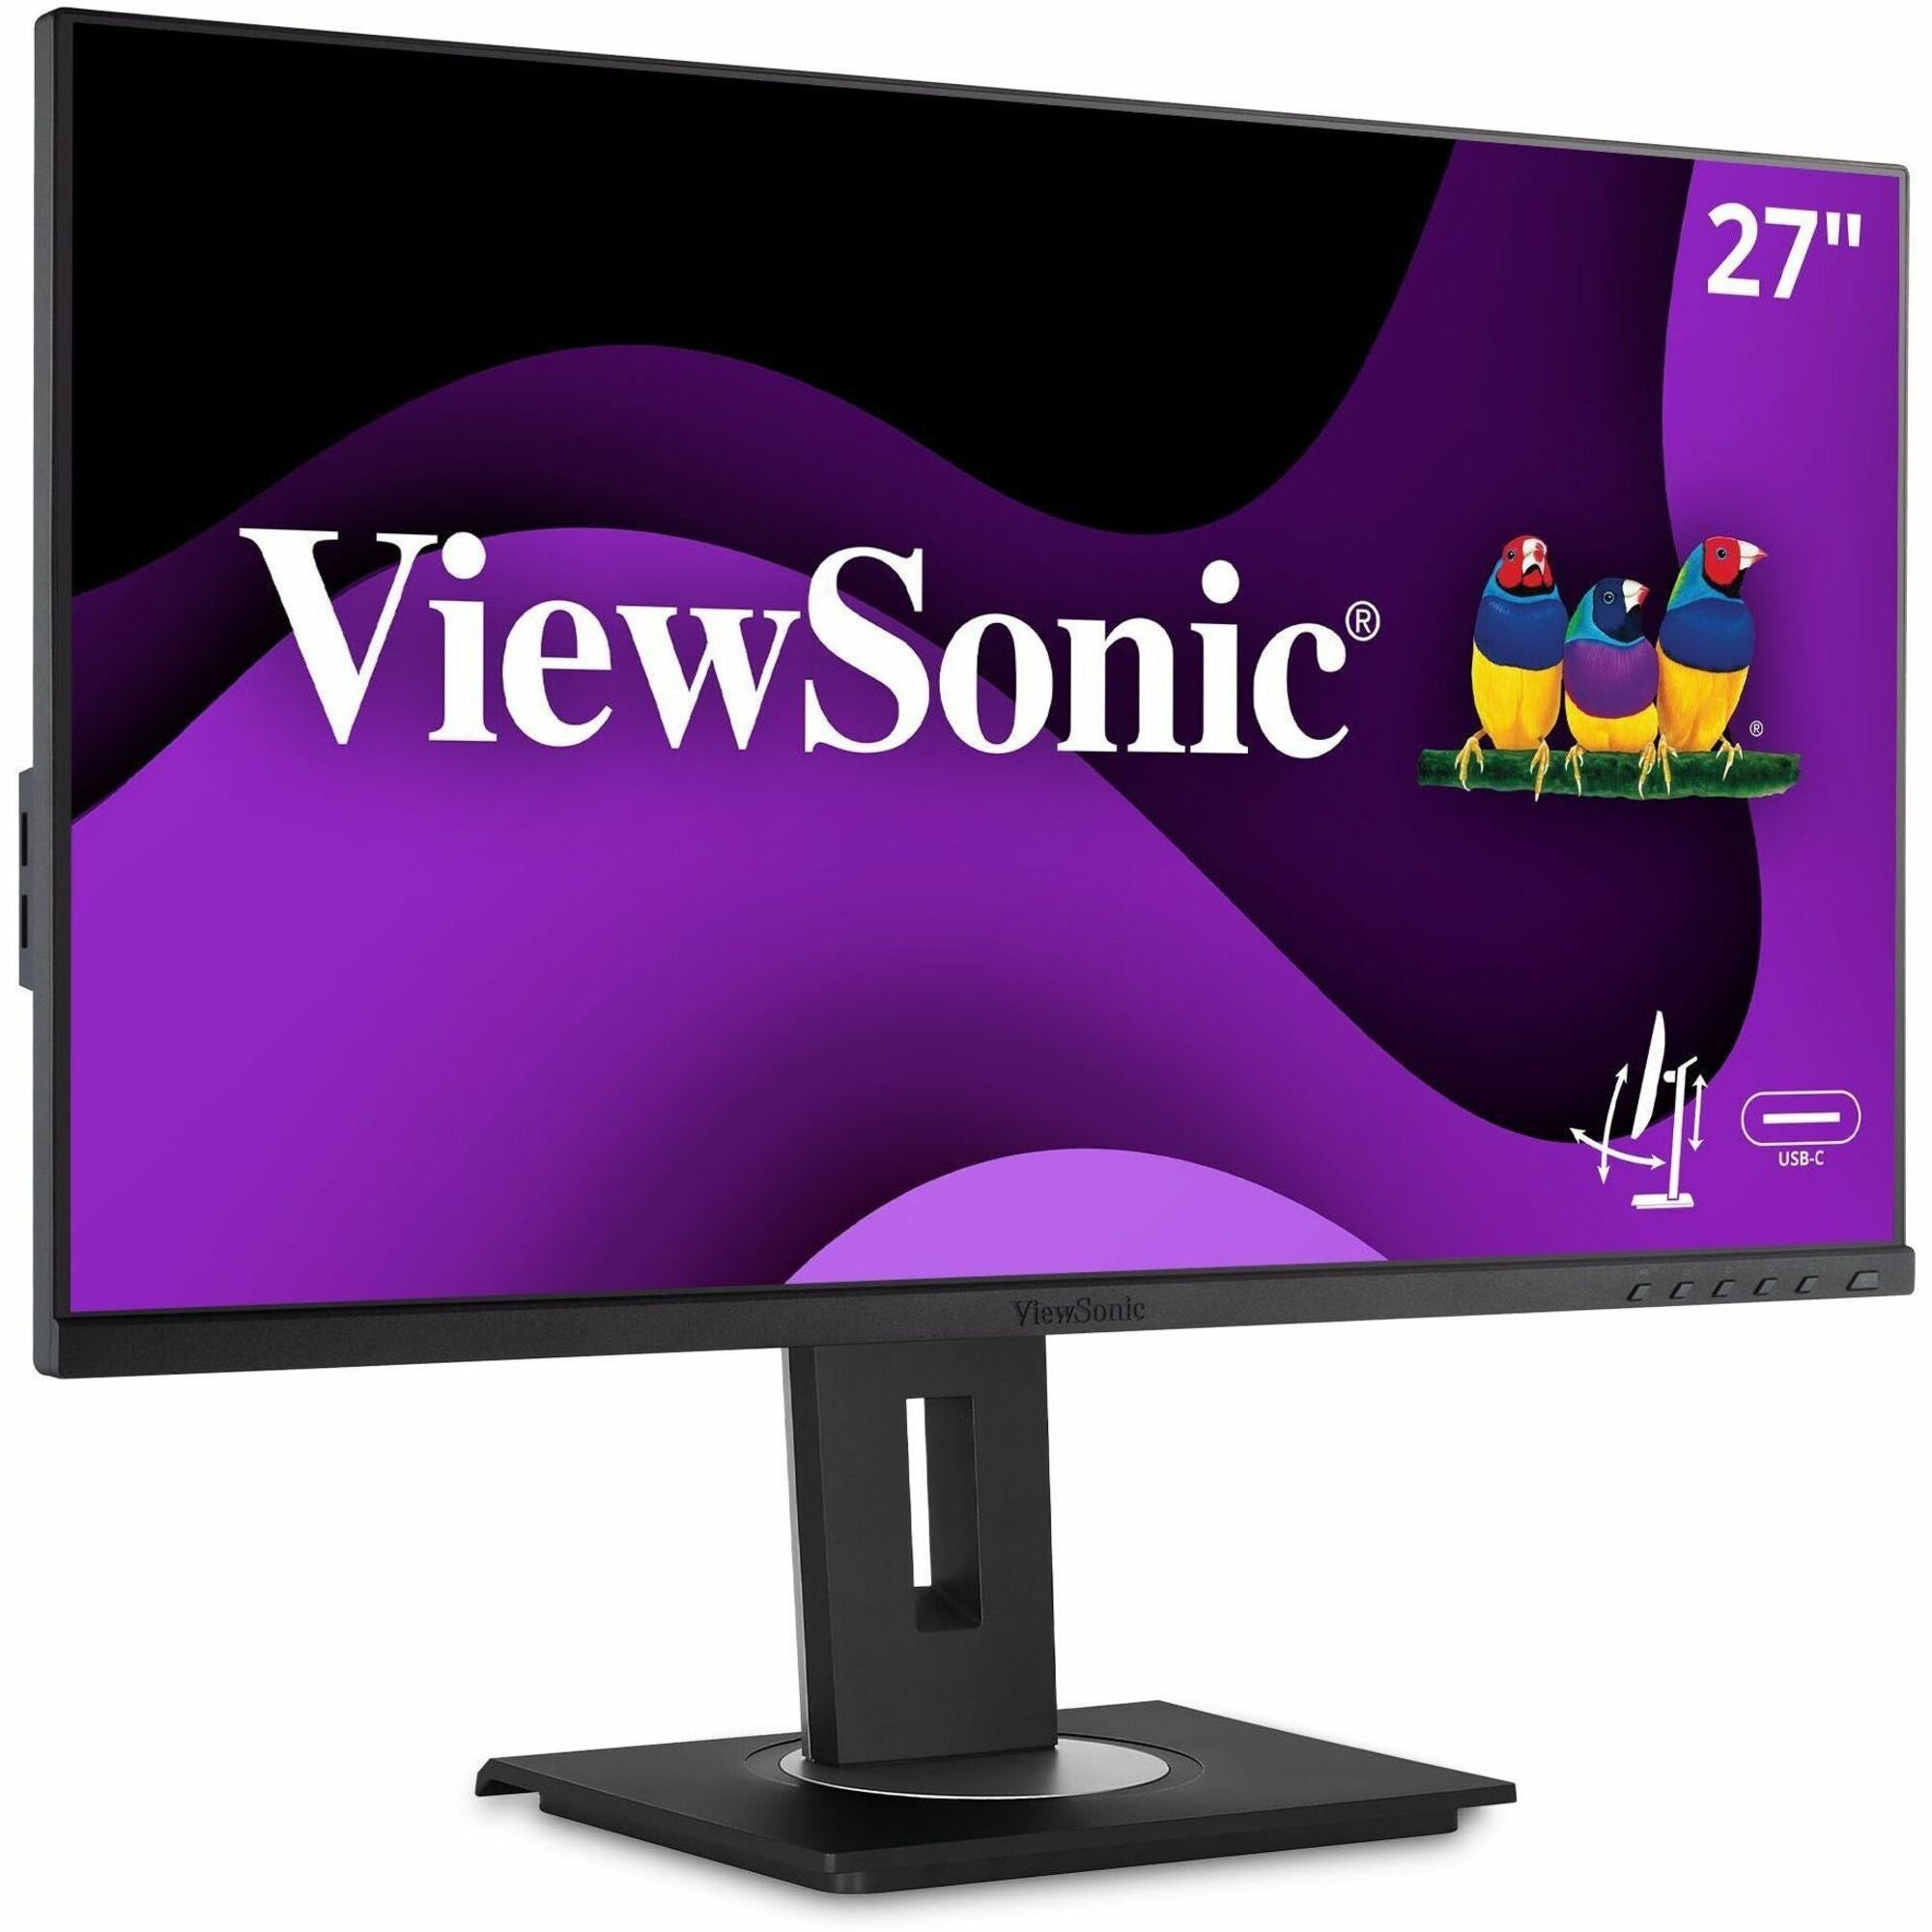 ViewSonic VG2755 27 Inch IPS 1080p Monitor with USB C 3.1, HDMI, DisplayPort, VGA and 40 Degree Tilt Ergonomics for Home and Office - VG2755